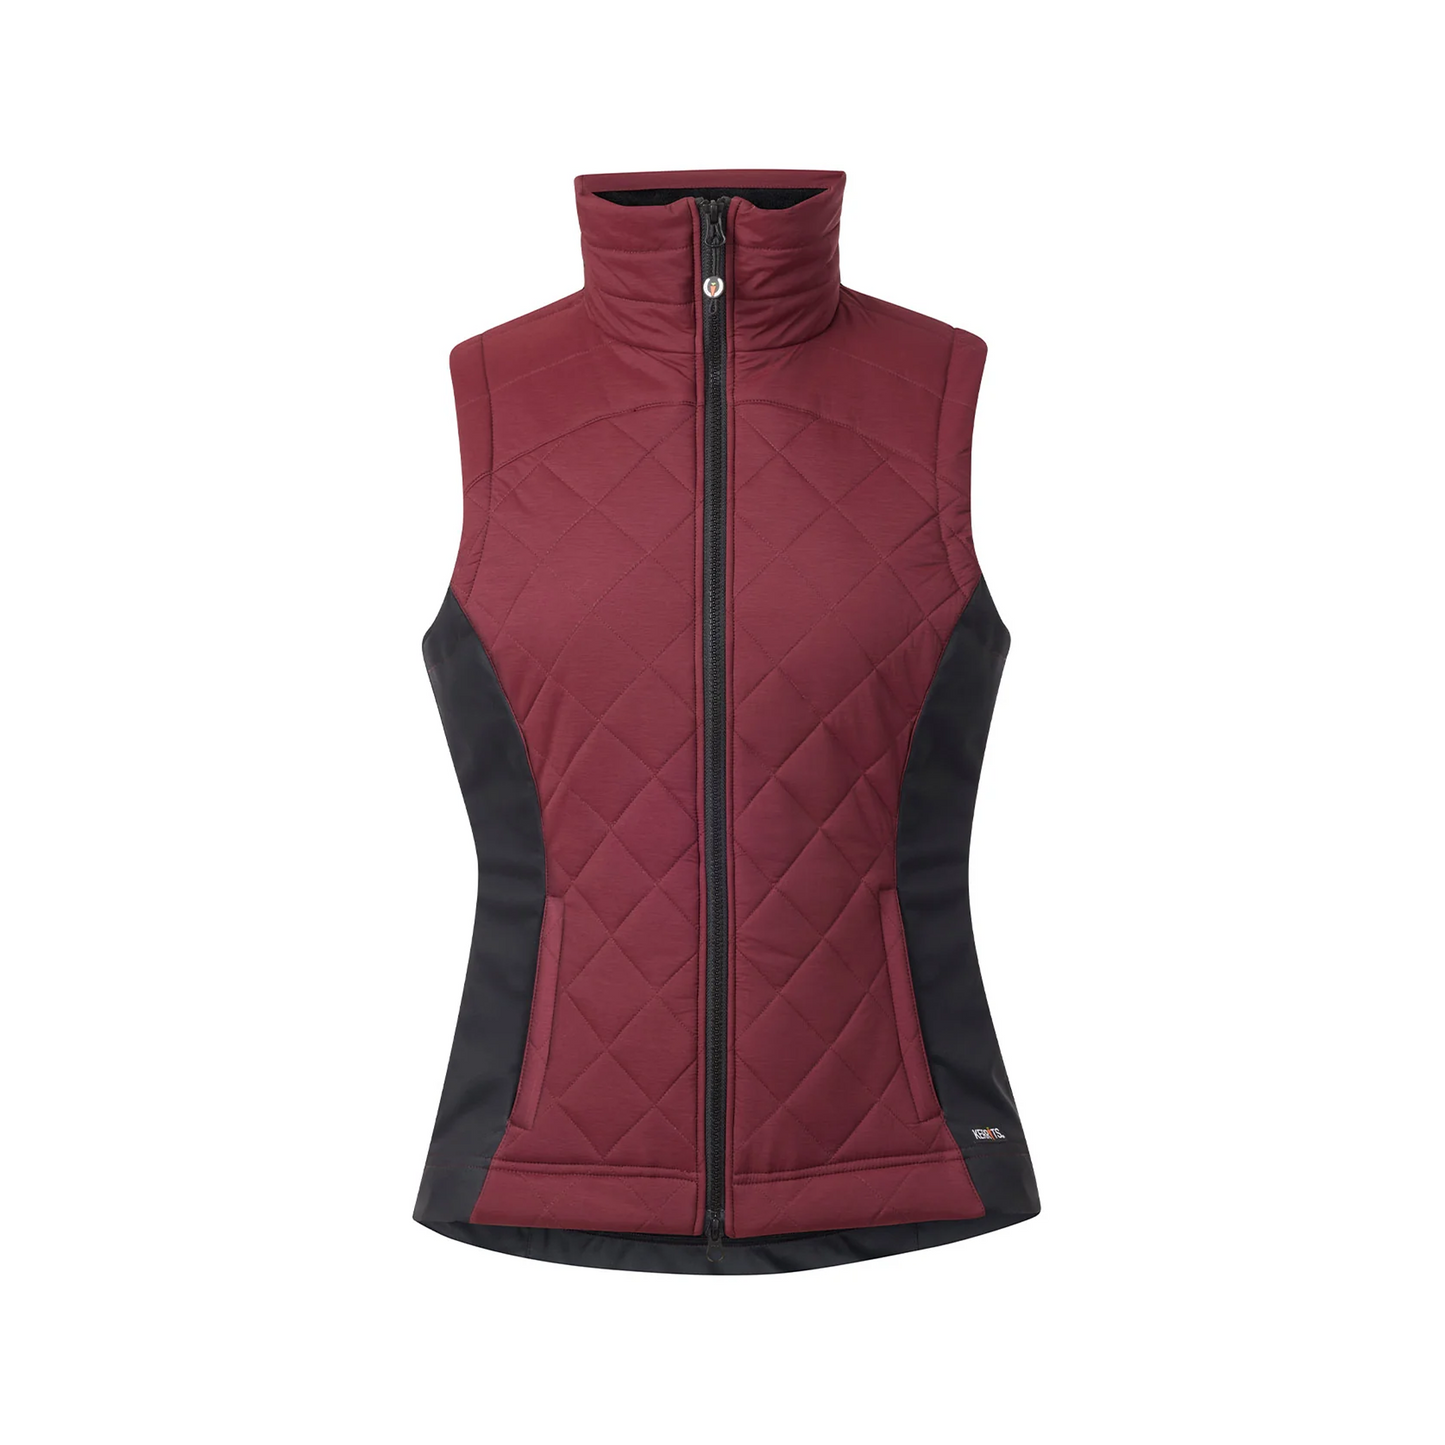 Full Motion Quilted Riding Vest